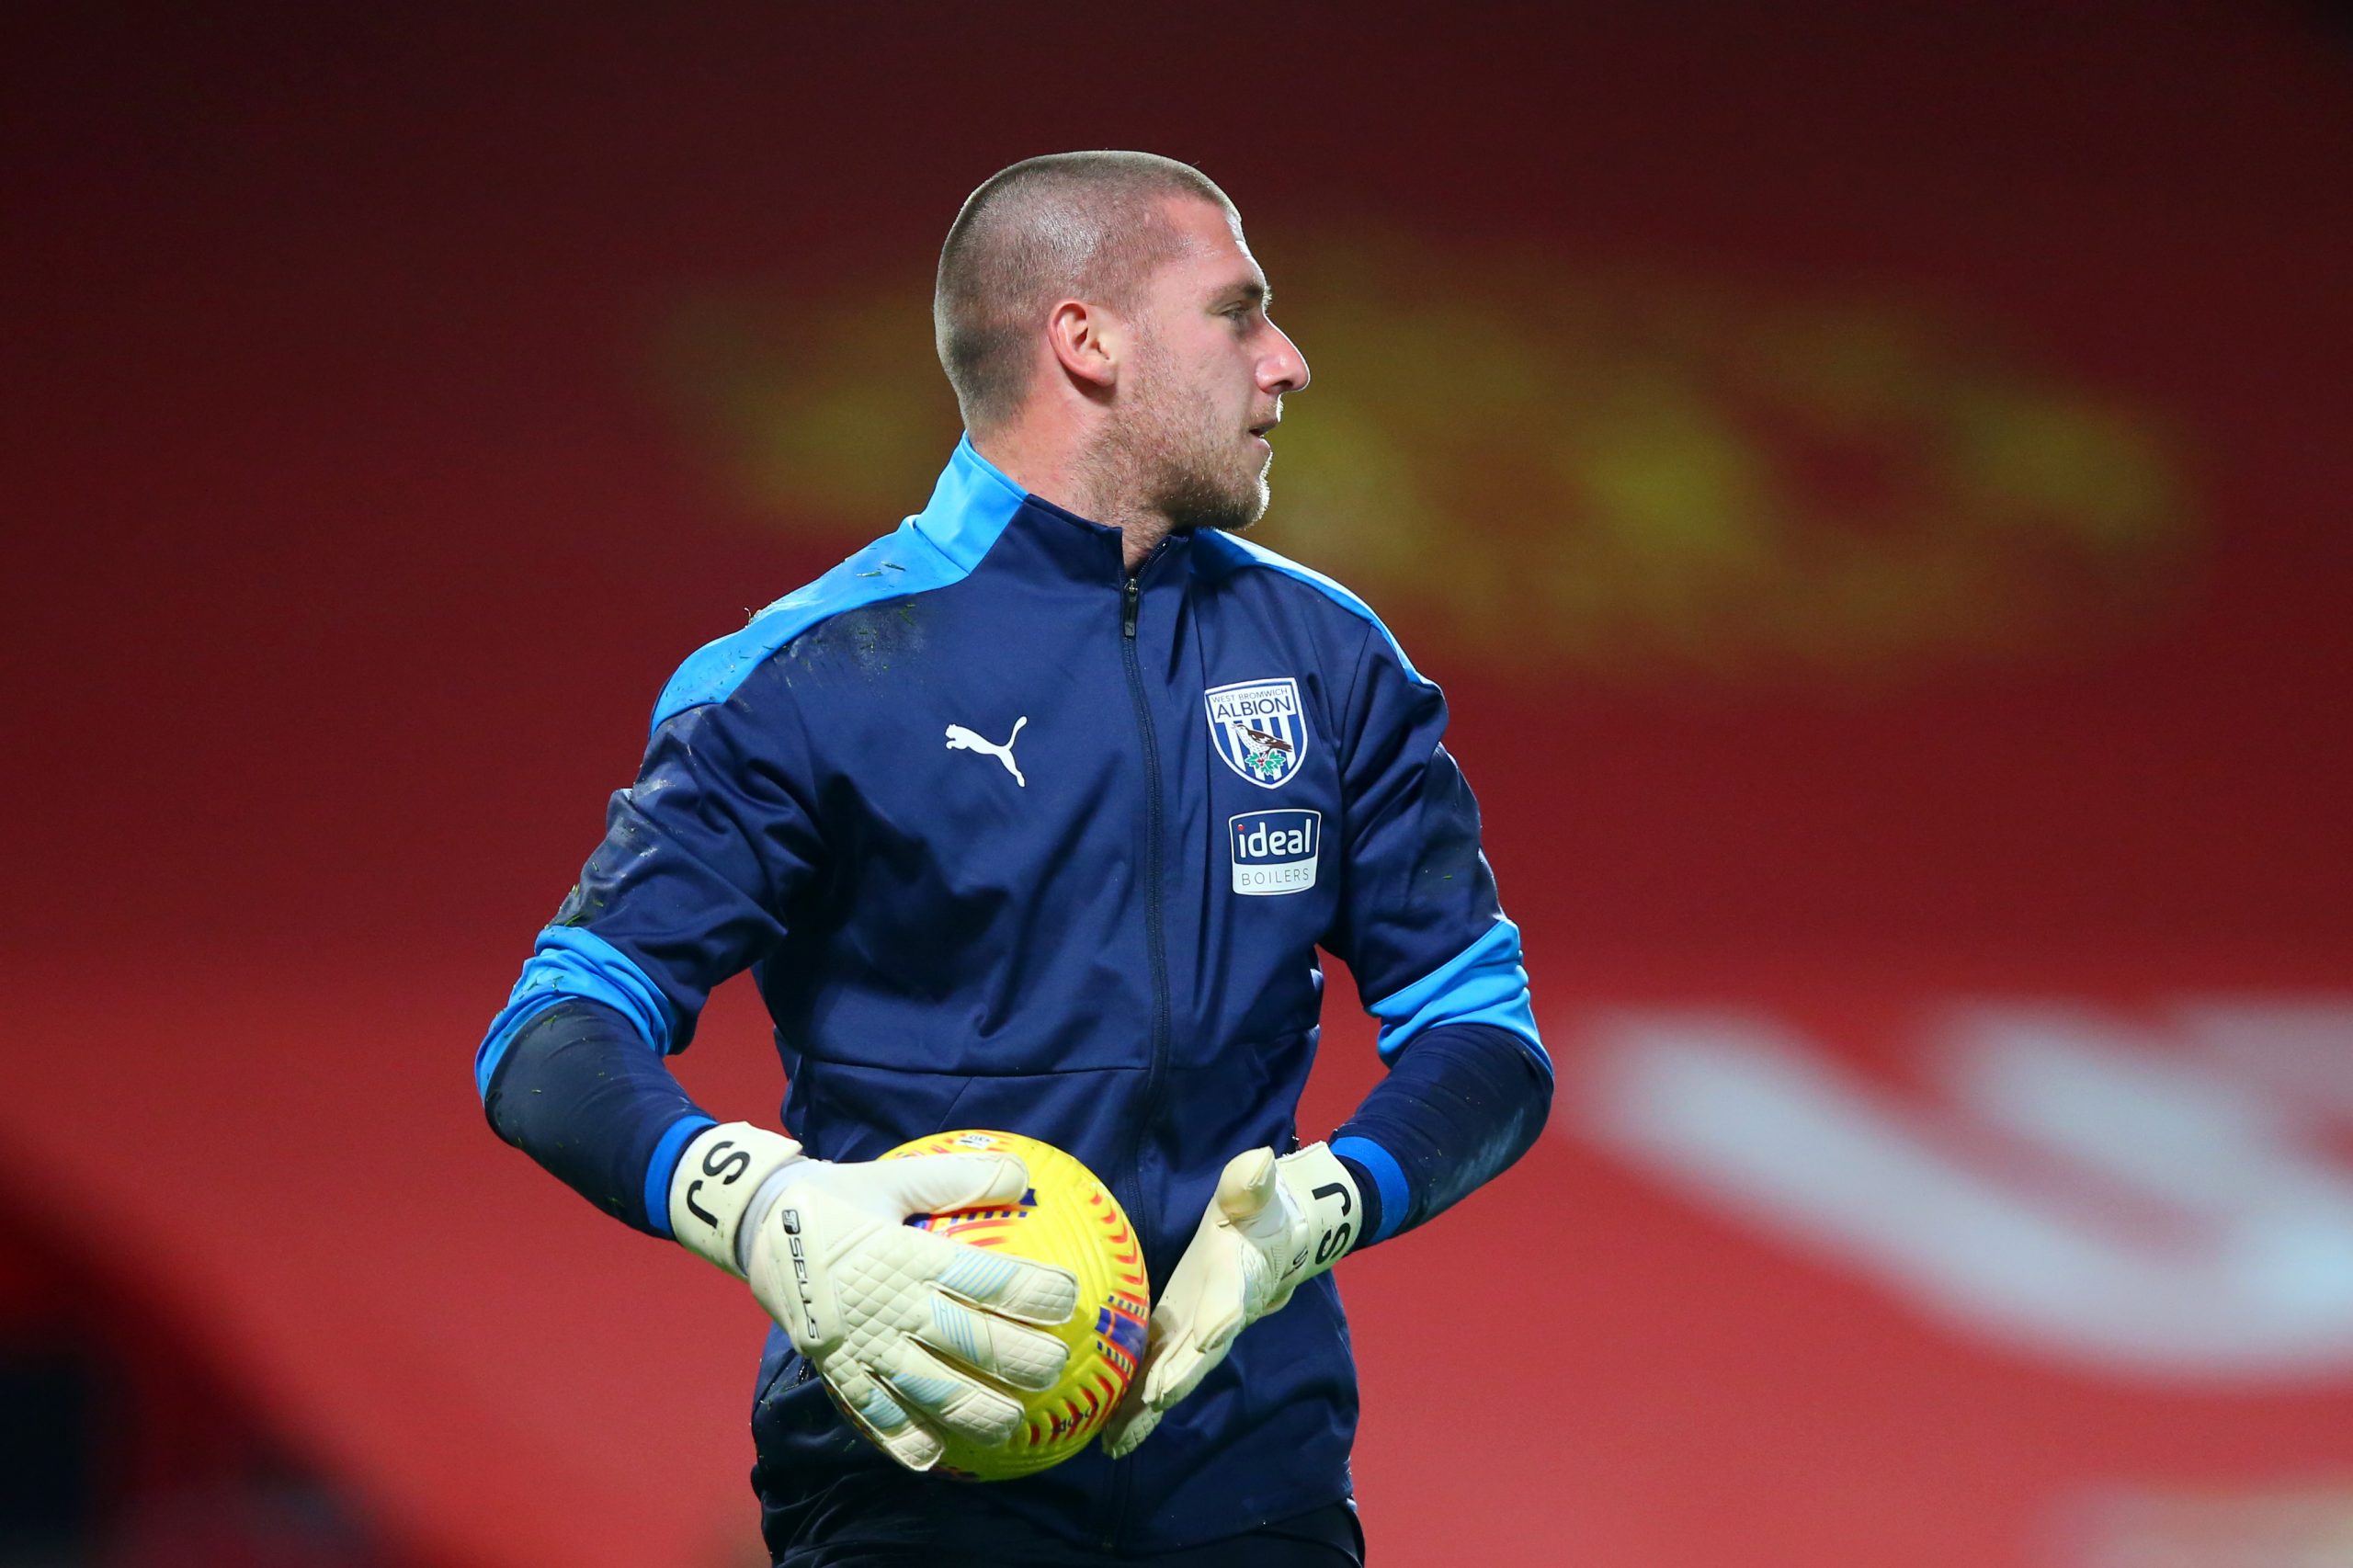 West Bromwich Albion goalkeeper Sam Johnstone in action. (GETTY Images)